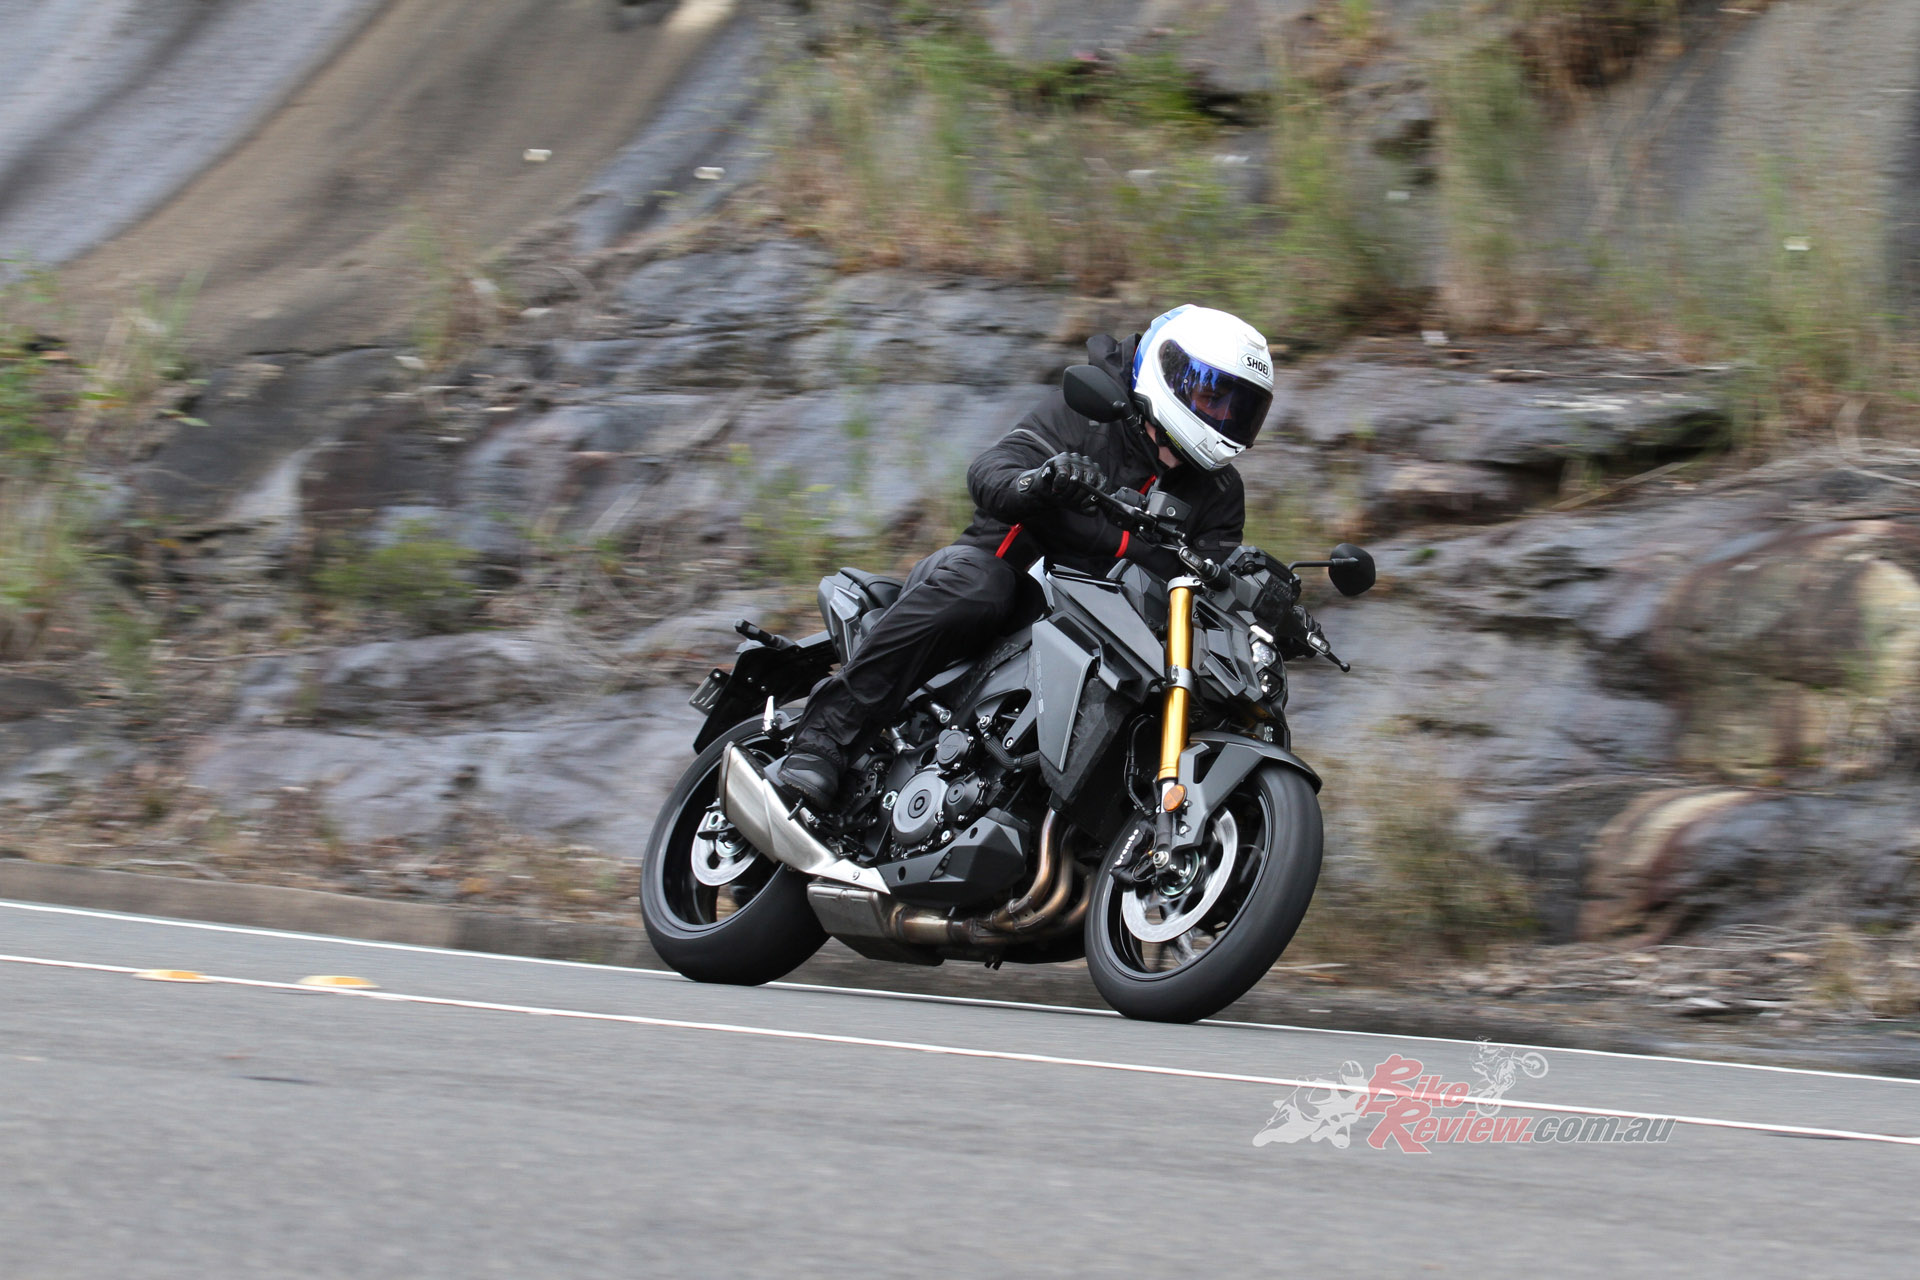 The 2022 Suzuki GSX-S1000 has unfortunately not been equipped with cornering ABS but the brakes are still great.